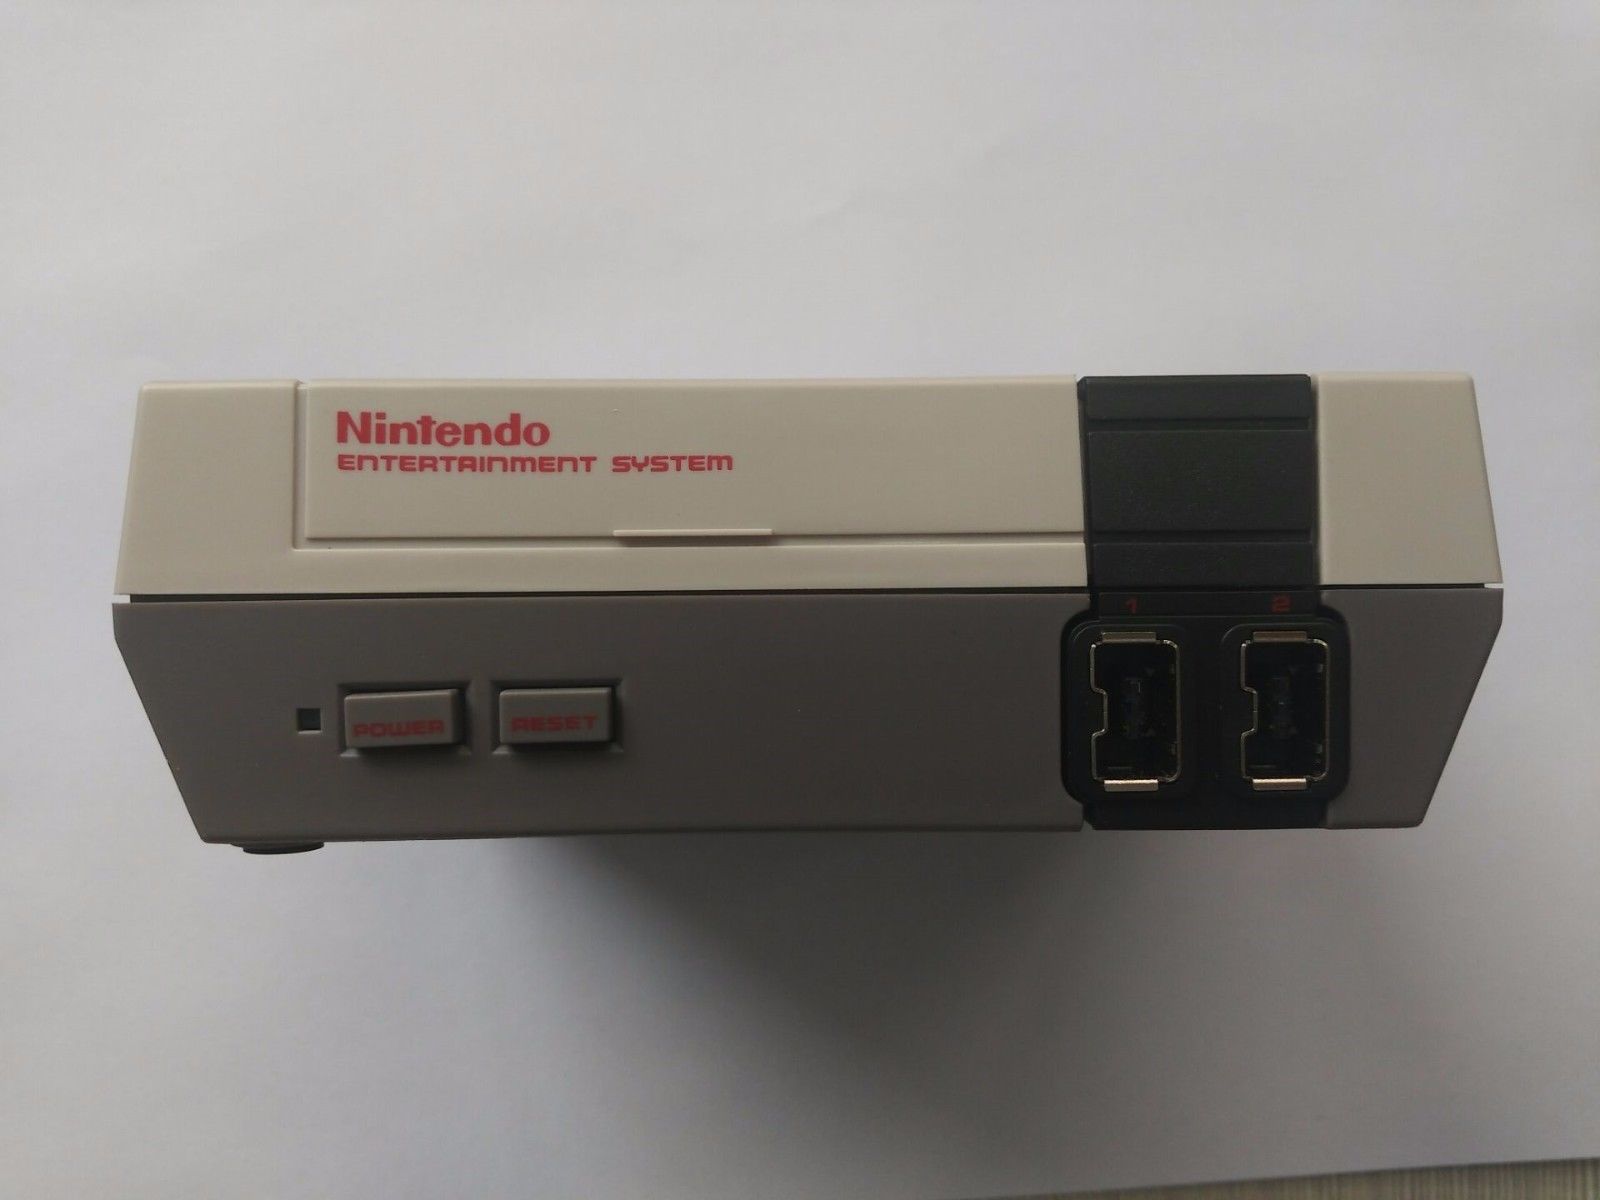 Fake NES Classic from neoGAF